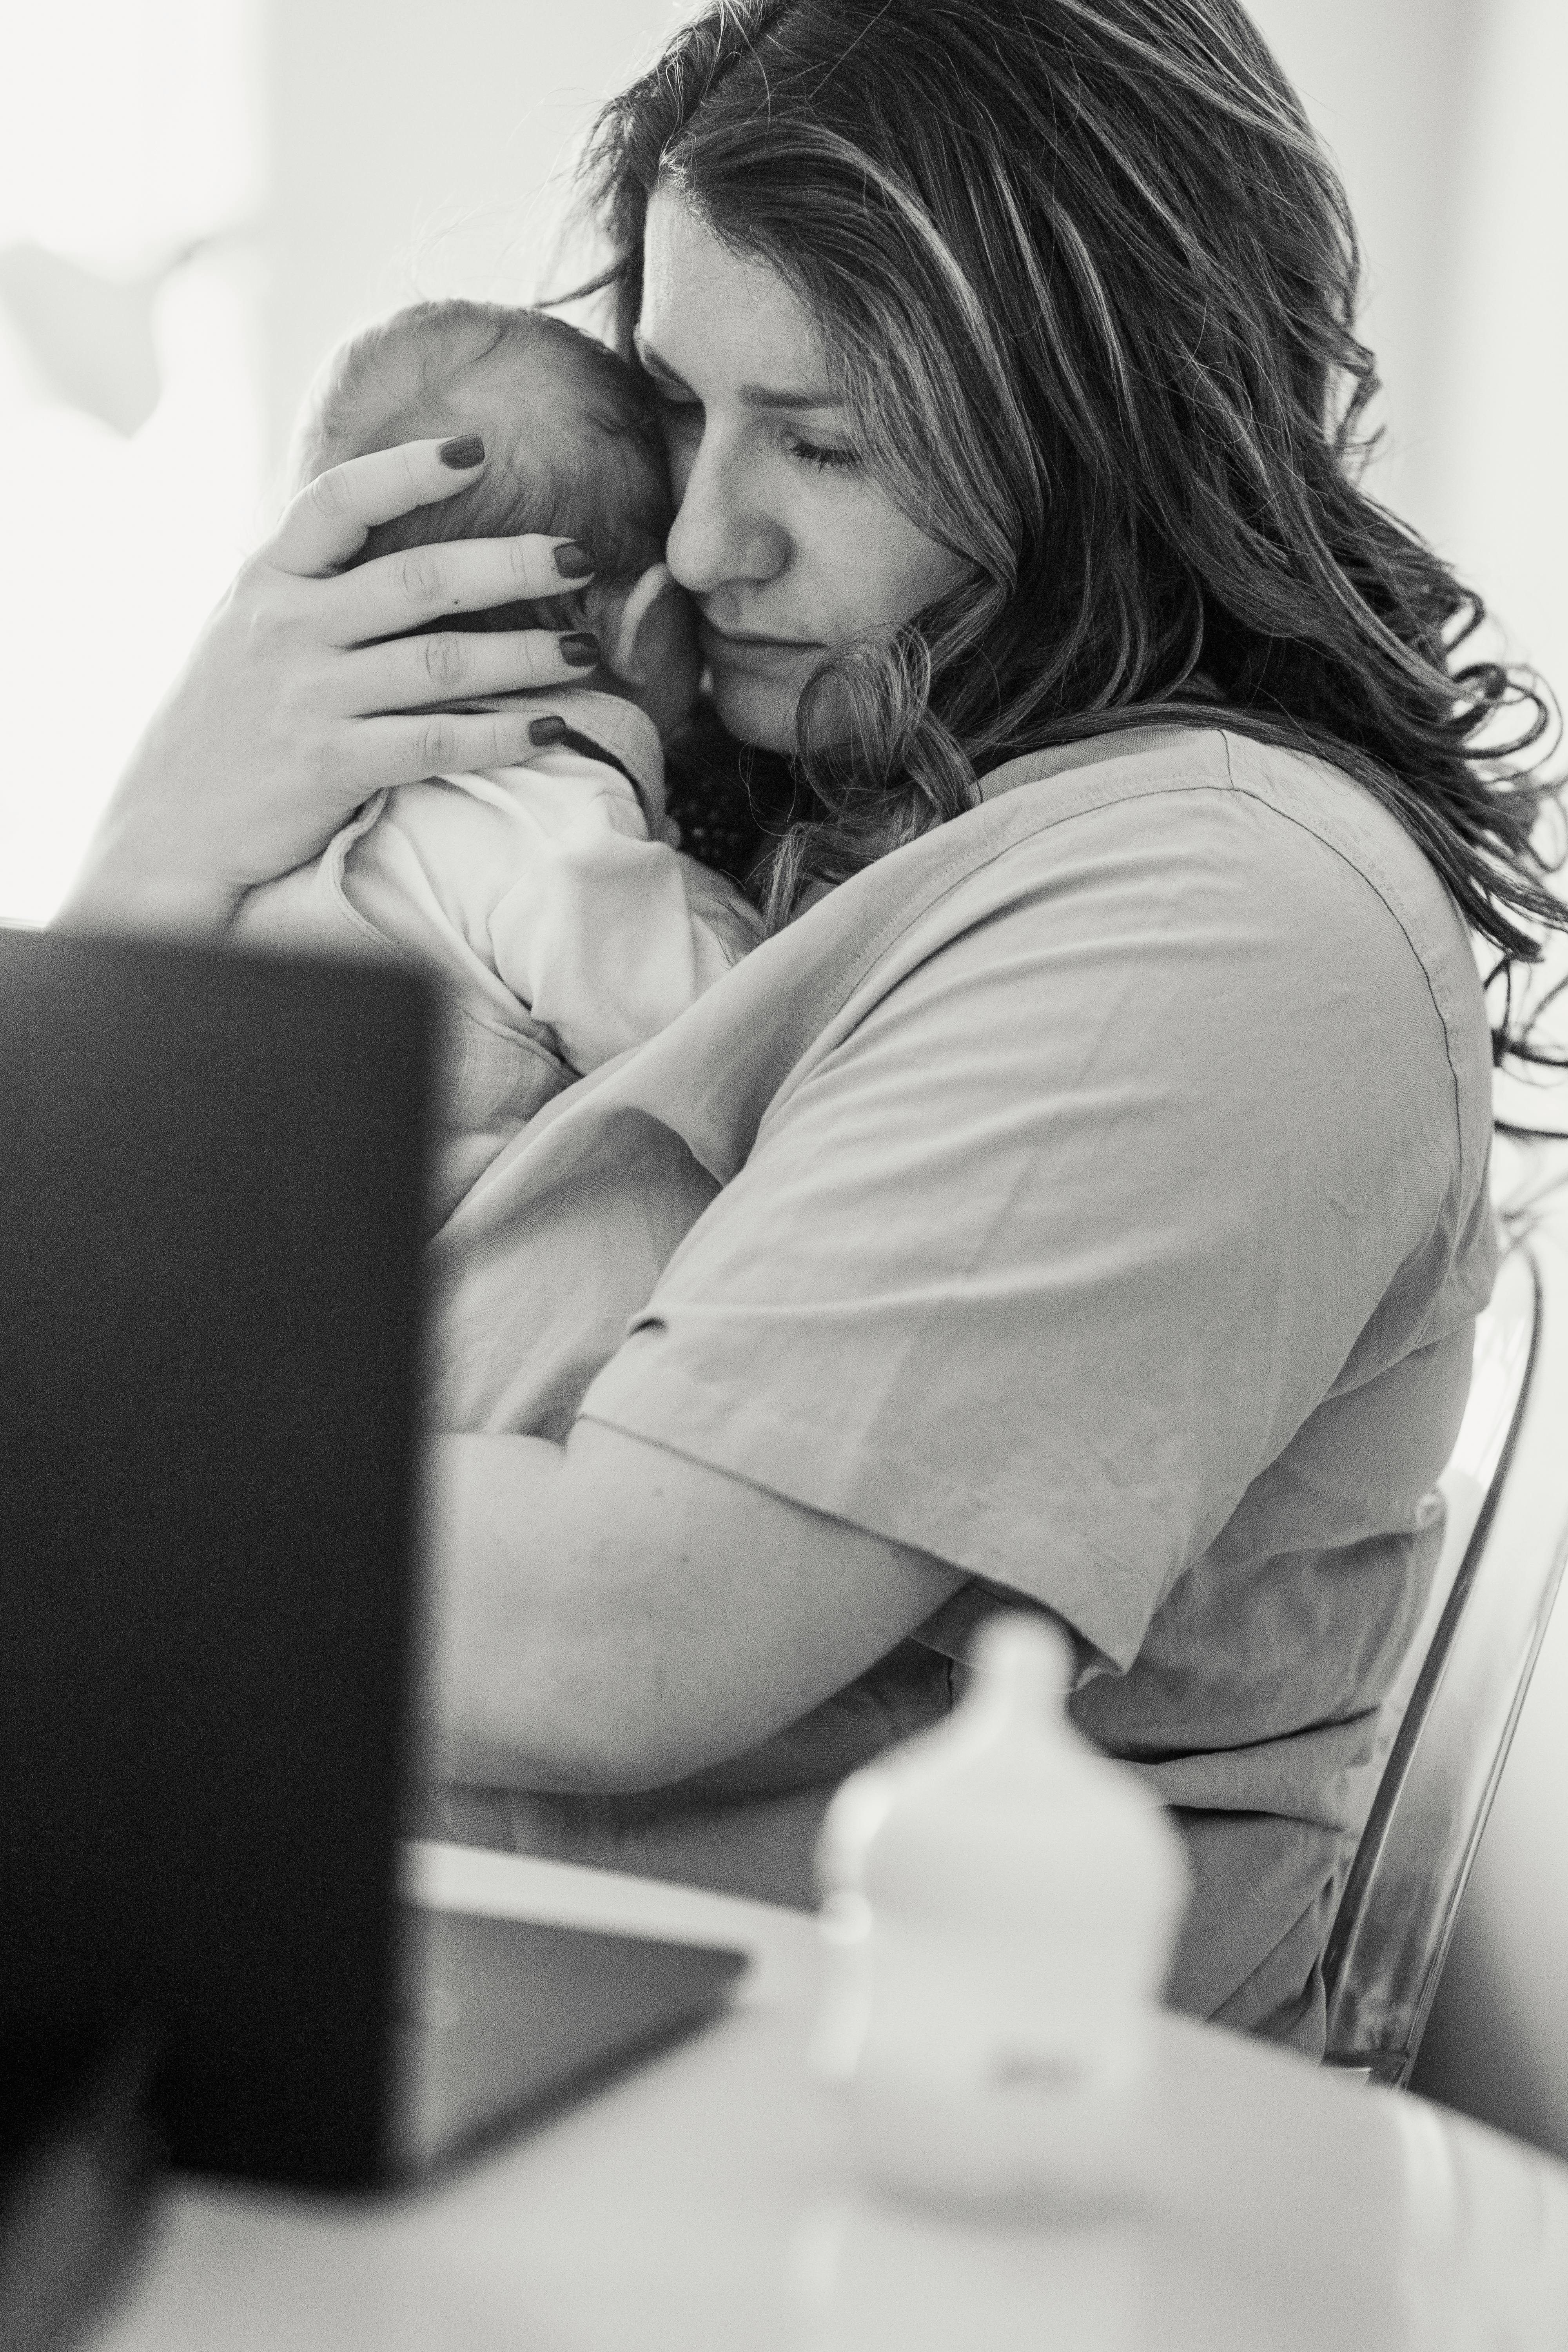 It’s Maternal Mental Health Week – and Derbyshire’s perinatal service is offering a range of support to local people with mental health concerns before, during or after pregnancy